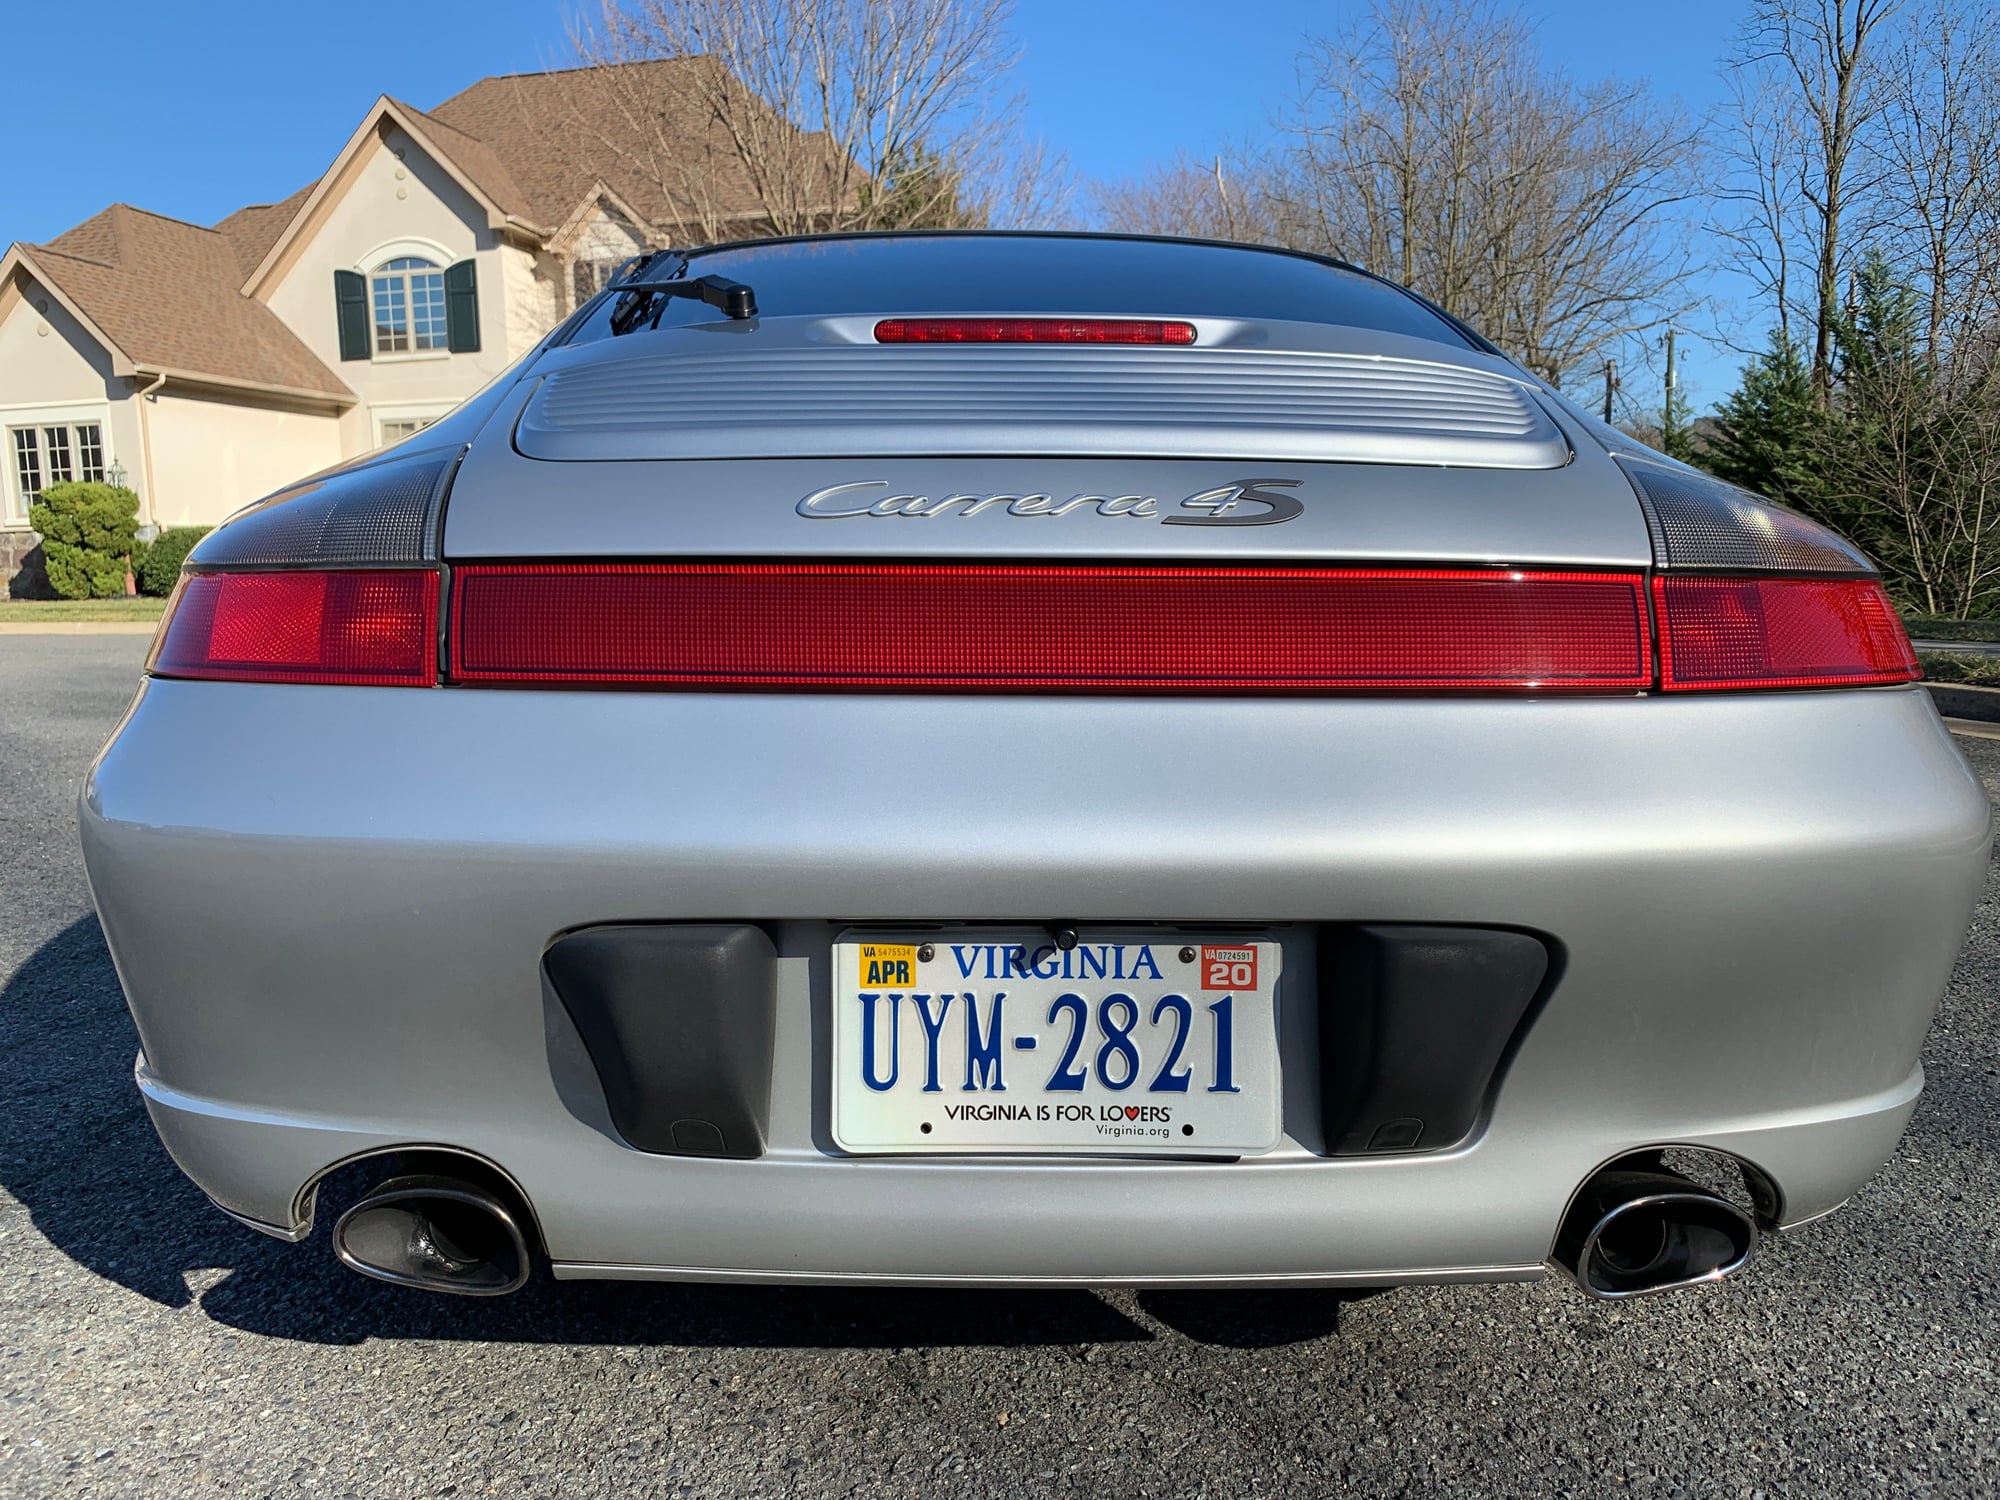 2002 Porsche 911 - 2002 996 C4S RWD conversion and LN 3.8 engine upgrade - Used - VIN WP0AA29932S622131 - 113,900 Miles - 6 cyl - 2WD - Manual - Coupe - Silver - Vienna, VA 22182, United States